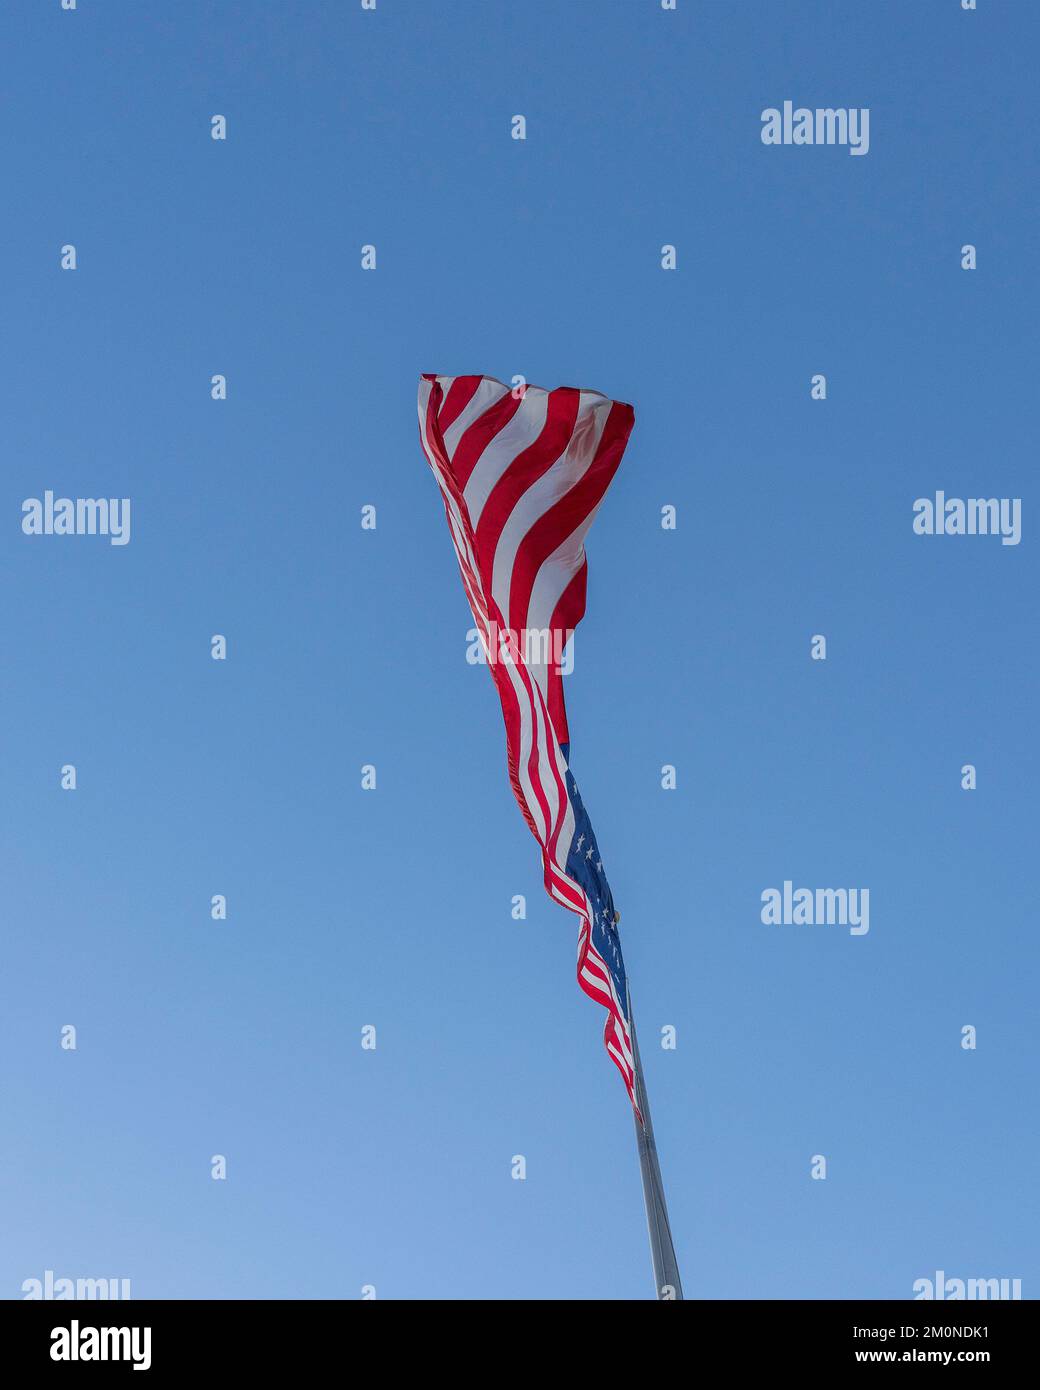 A large American flag blows in the wind against a bright blue sky. Stock Photo